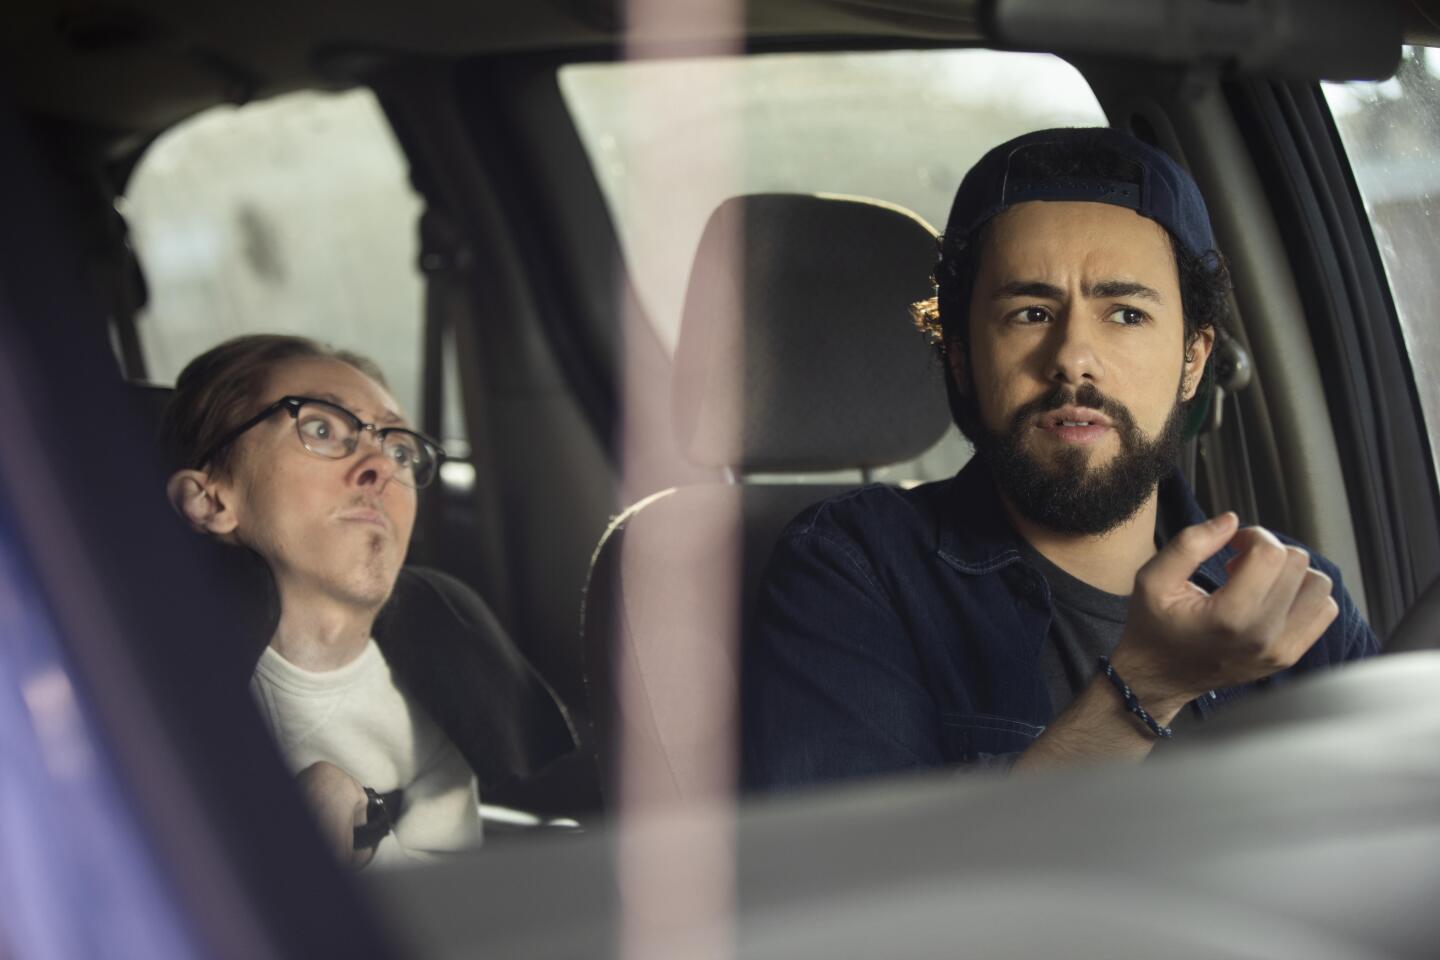 Snub: Ramy, Comedy Series. While actor Ramy Youssef earned an acting nod, the show itself was not recognized with a nomination this year.